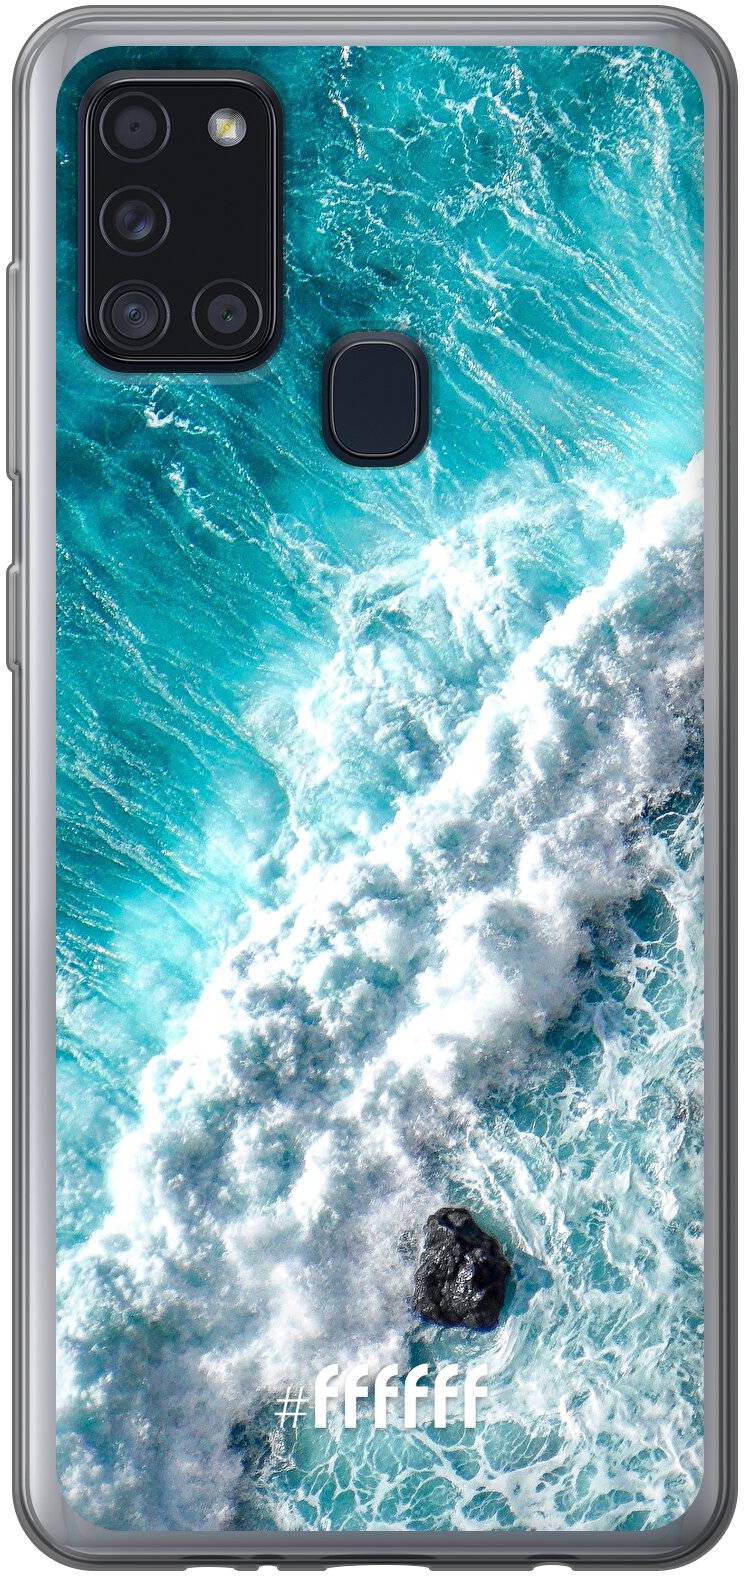 Perfect to Surf Galaxy A21s